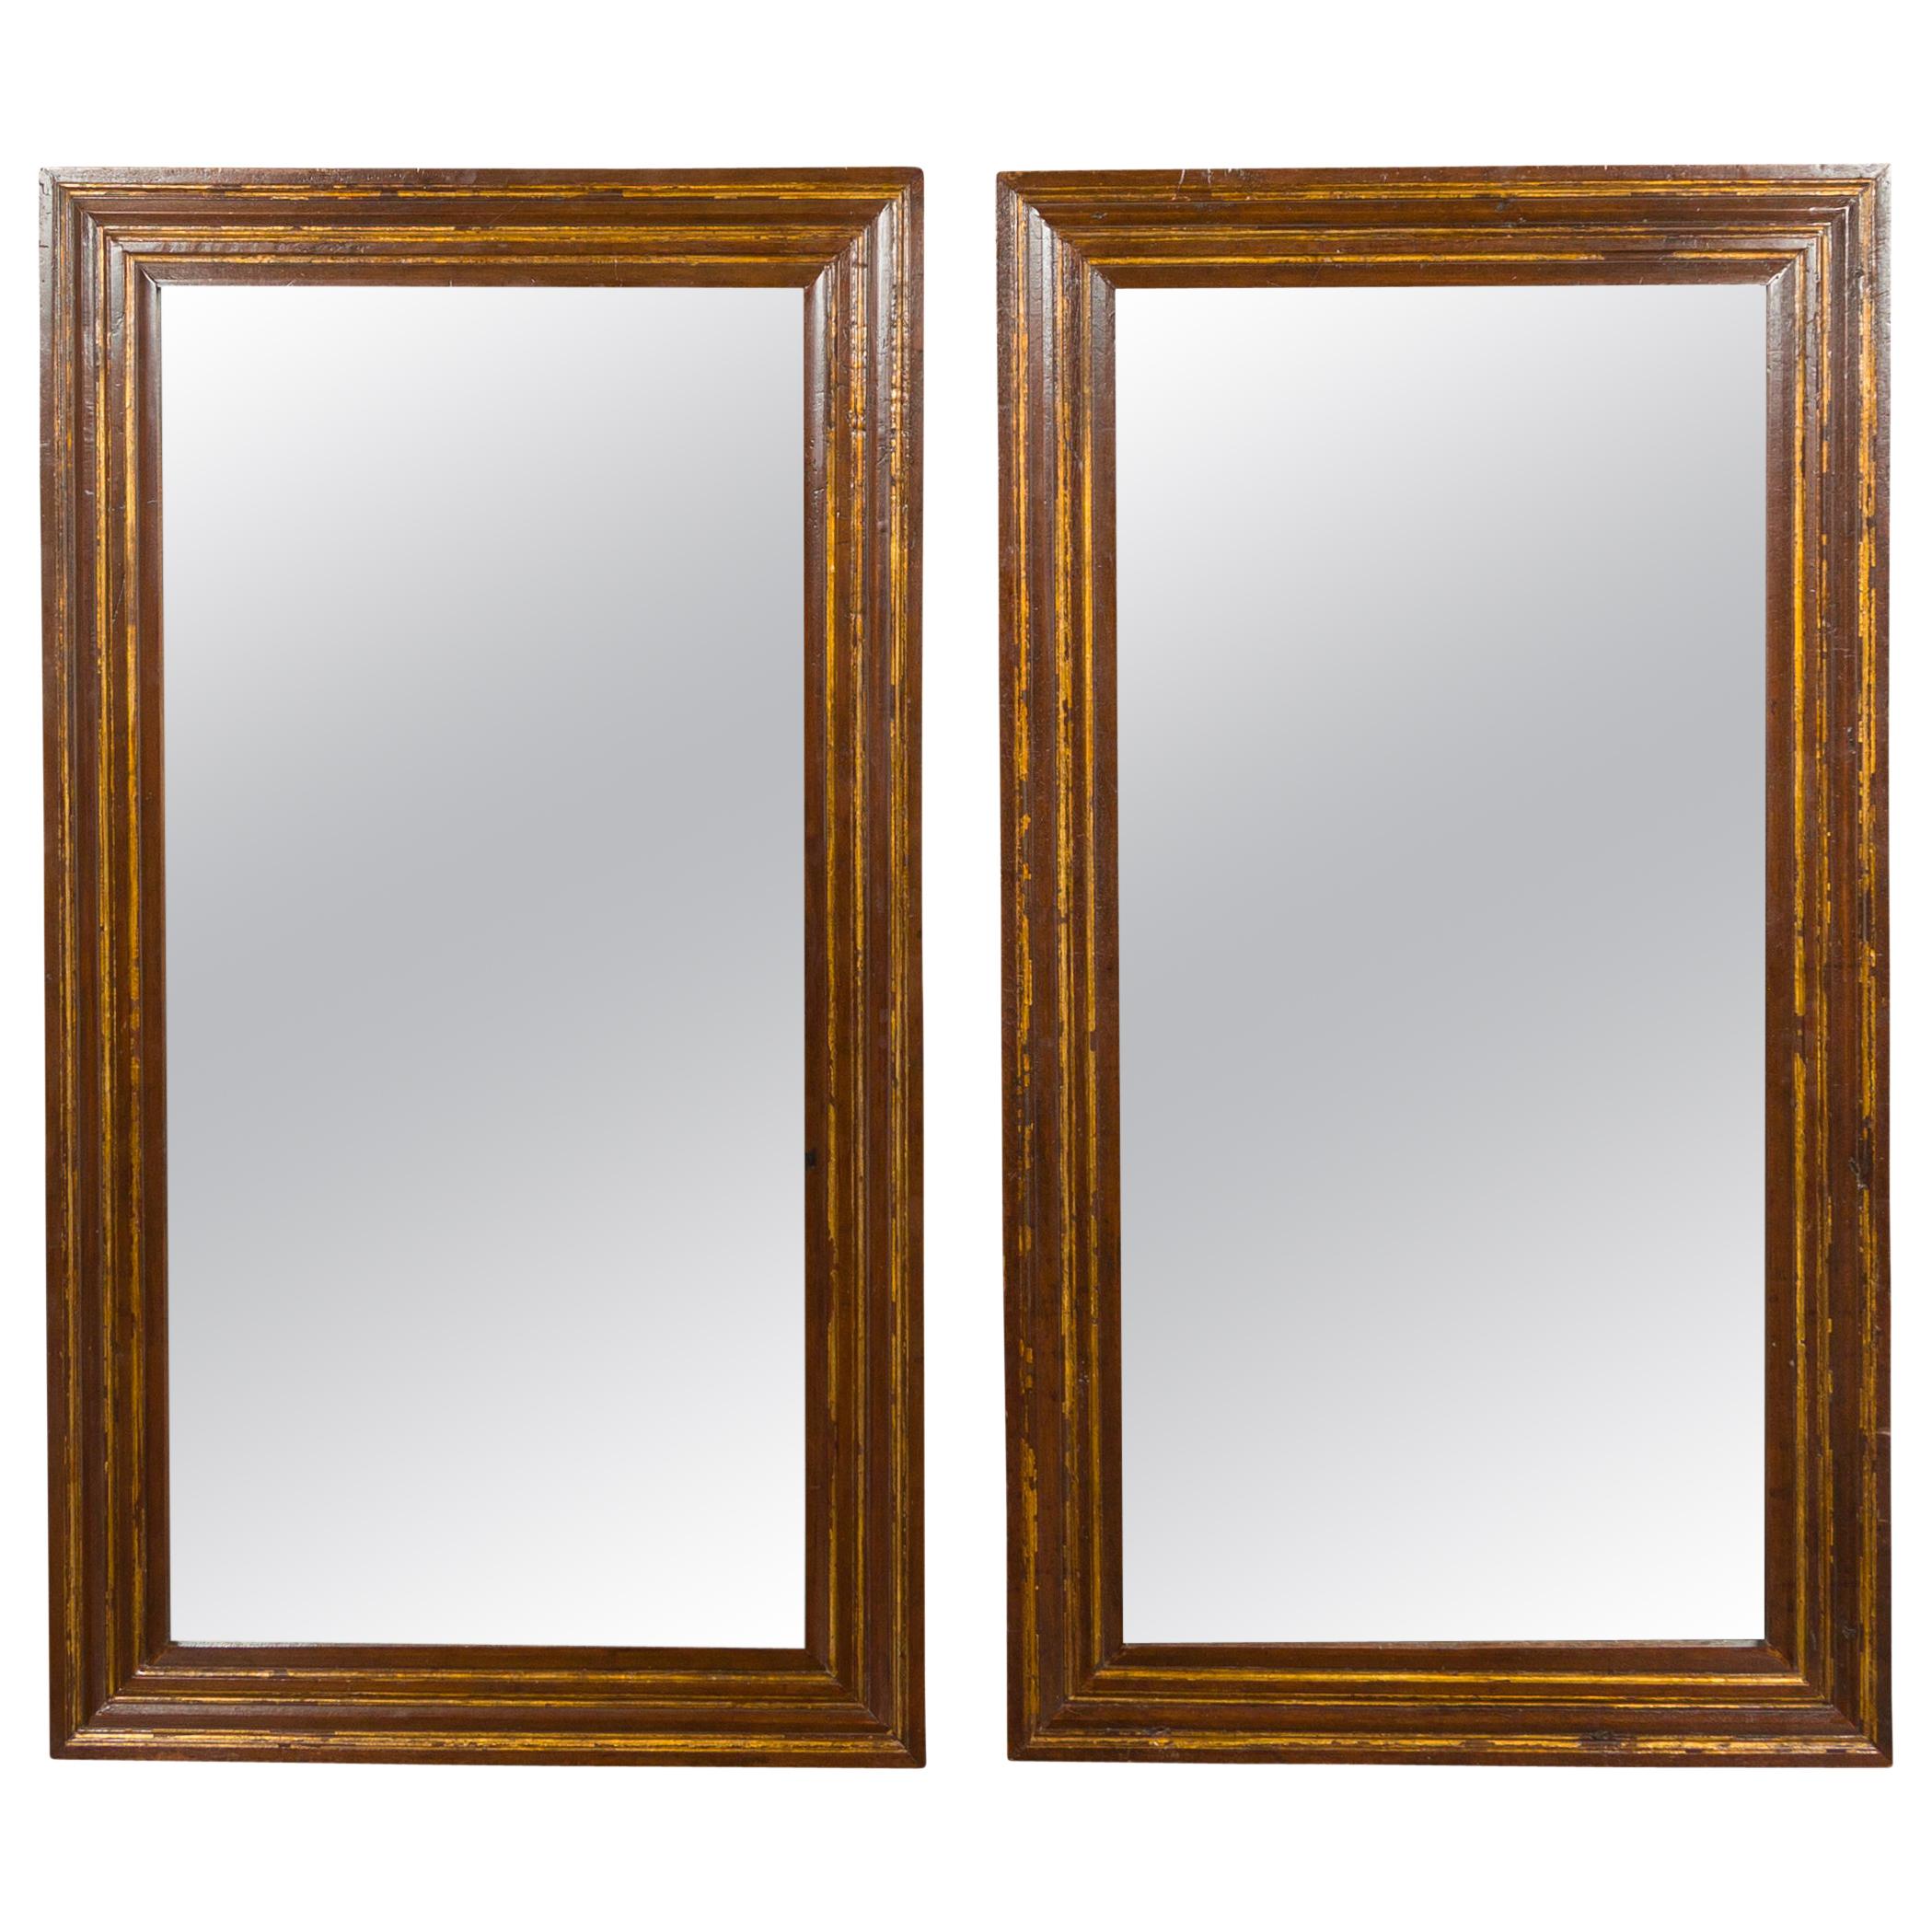 Pair of Italian 1820s Walnut Rectangular Brown Mirrors with Gilded Accents